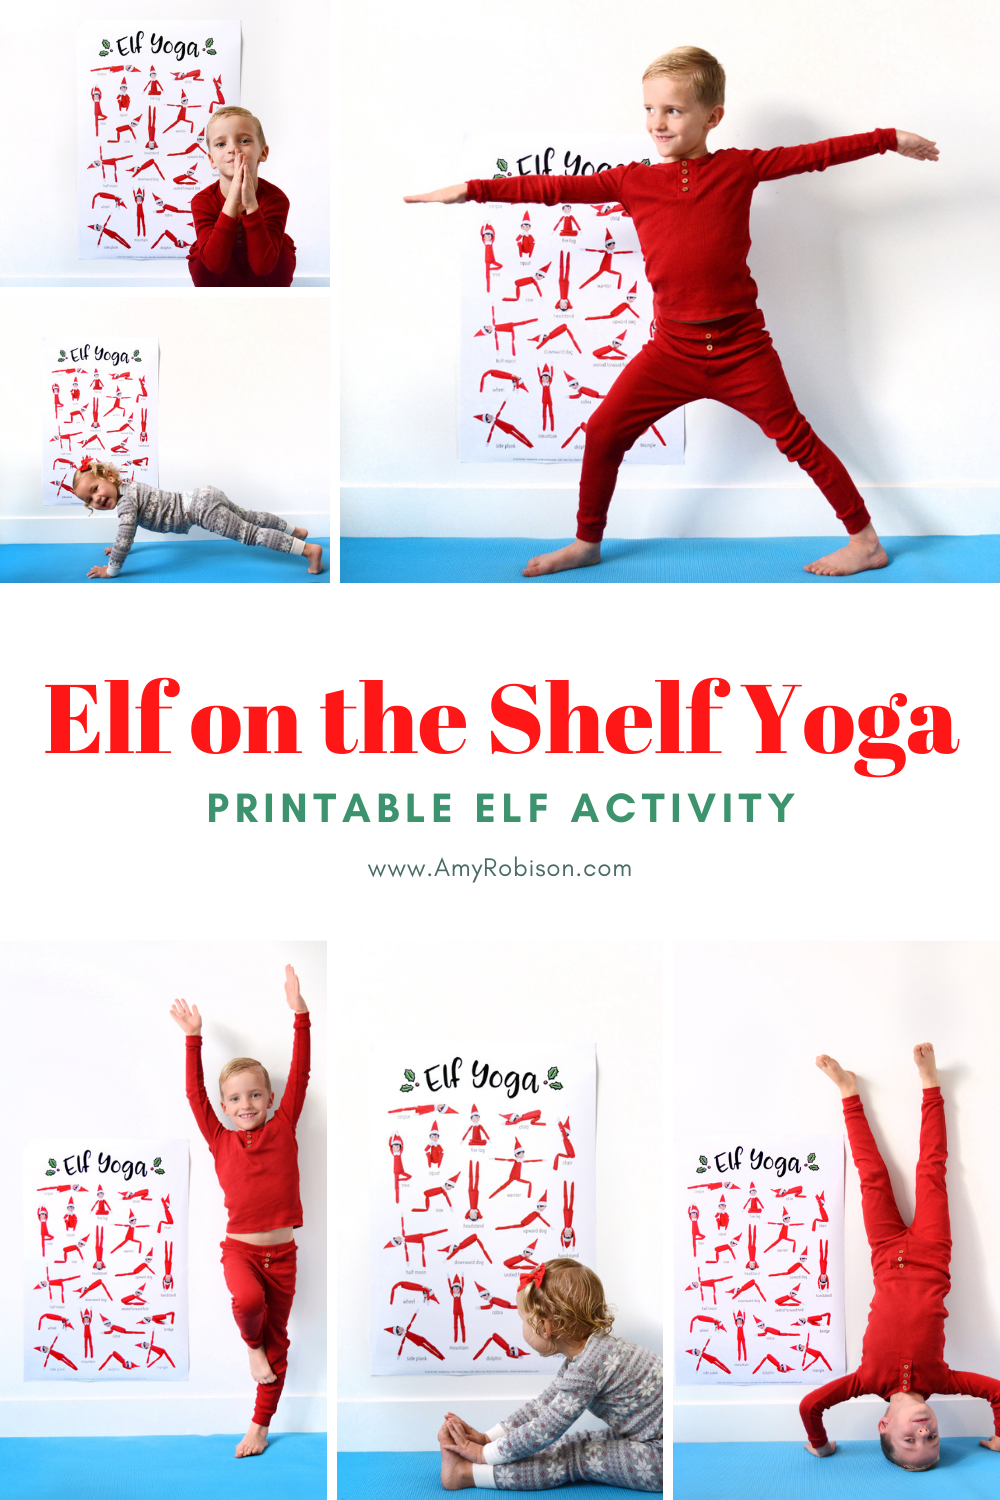 Yoga for Children: 200+ Yoga Poses, Breathing Exercises, and Meditations  for Healthier, Happier, More Resilient Children (Yoga for Children Series):  Flynn, Lisa: 0045079554634: Amazon.com: Books